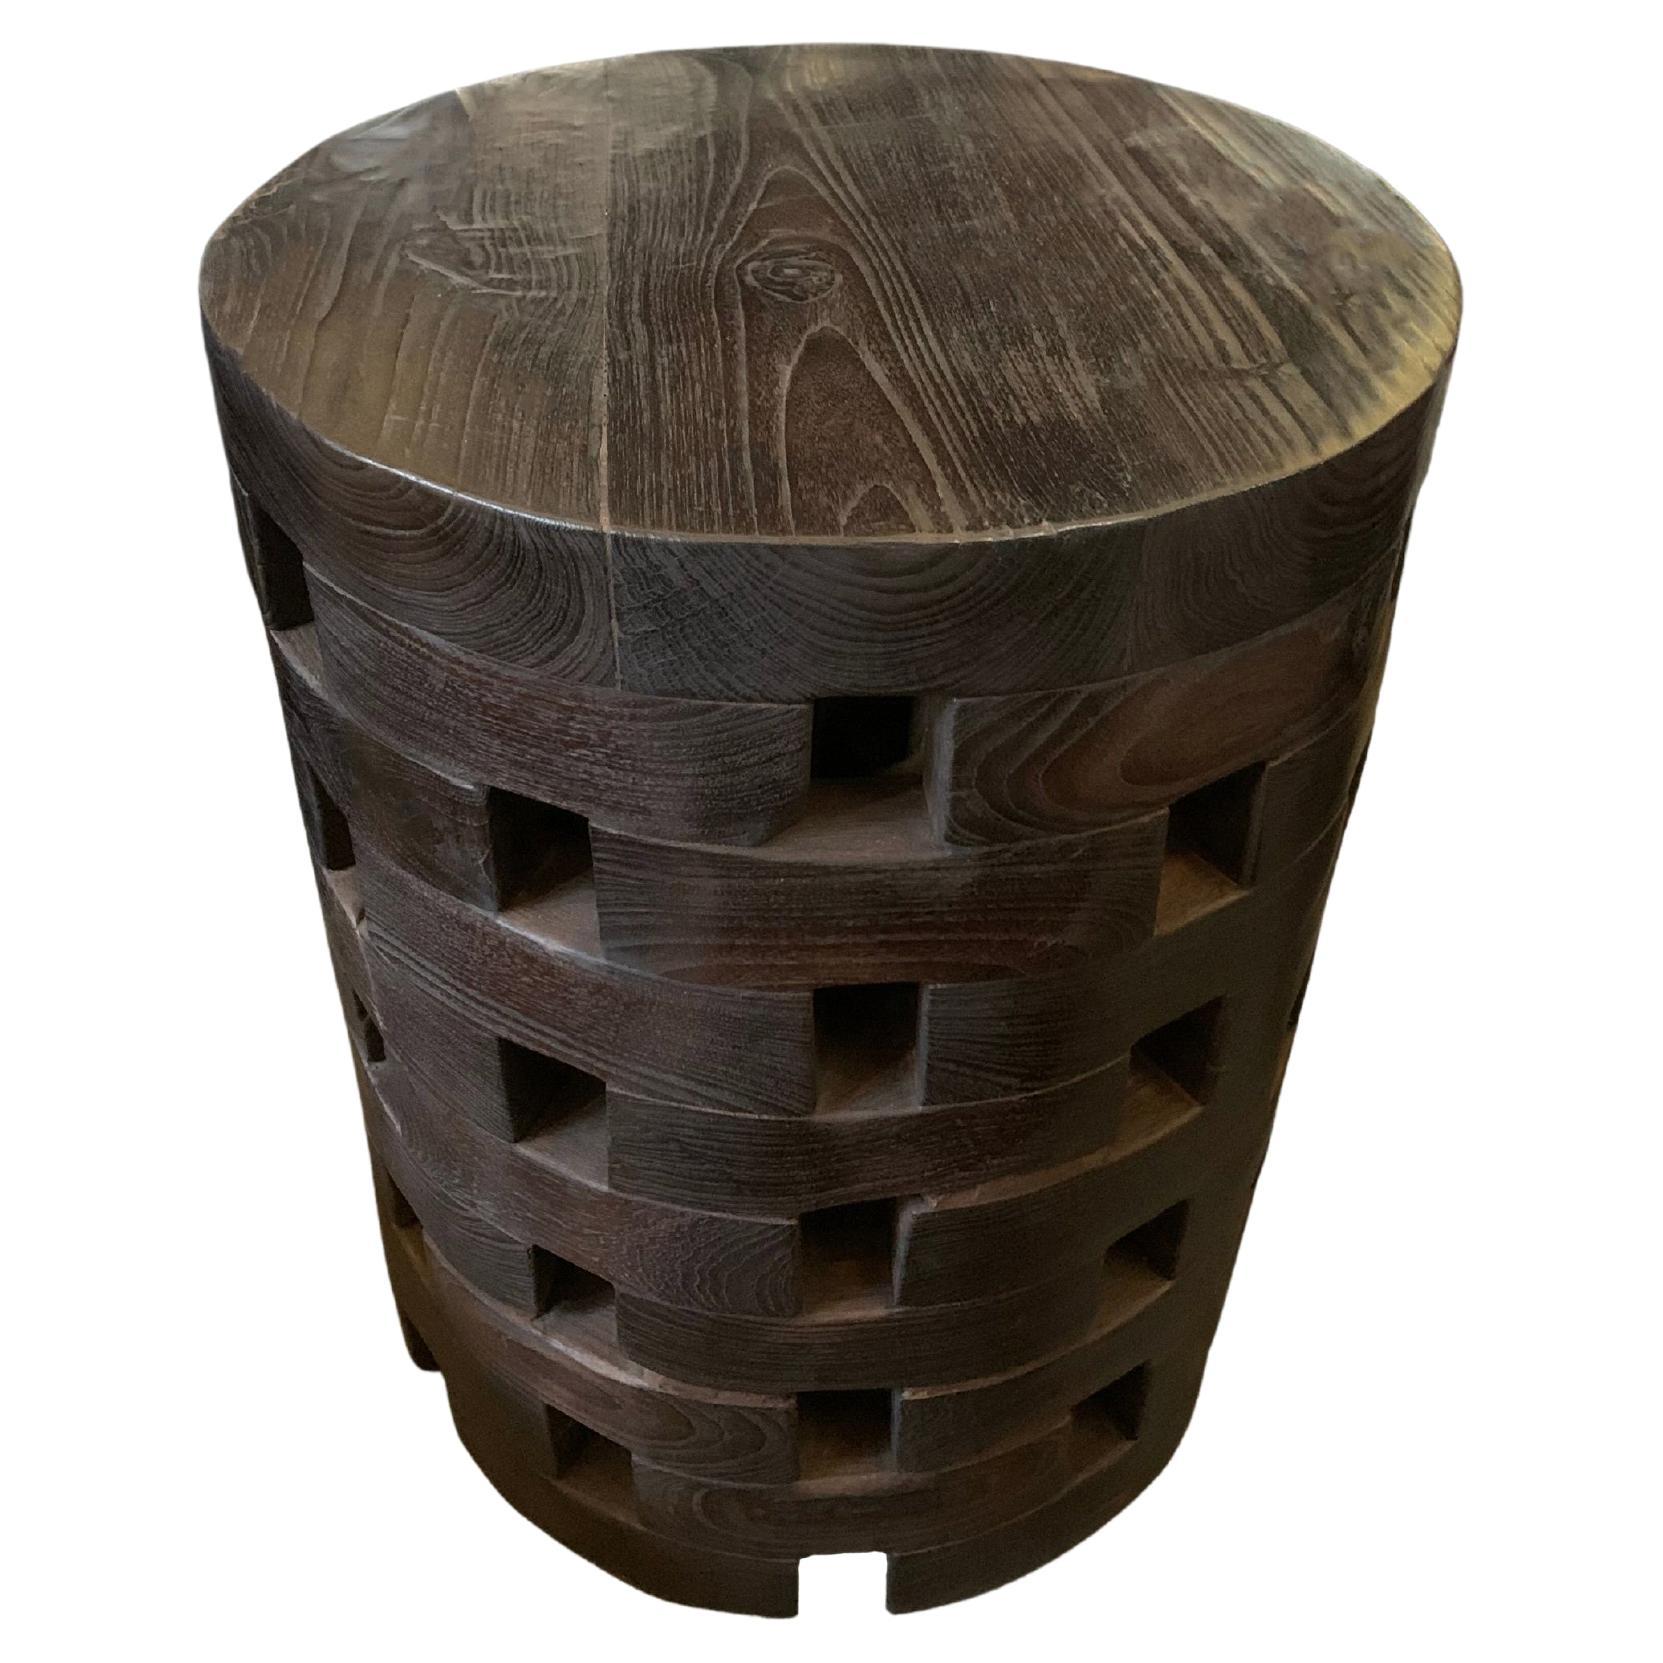 Sculptural Side Table, Solid Mango Wood, with Dark Lacquered Finish